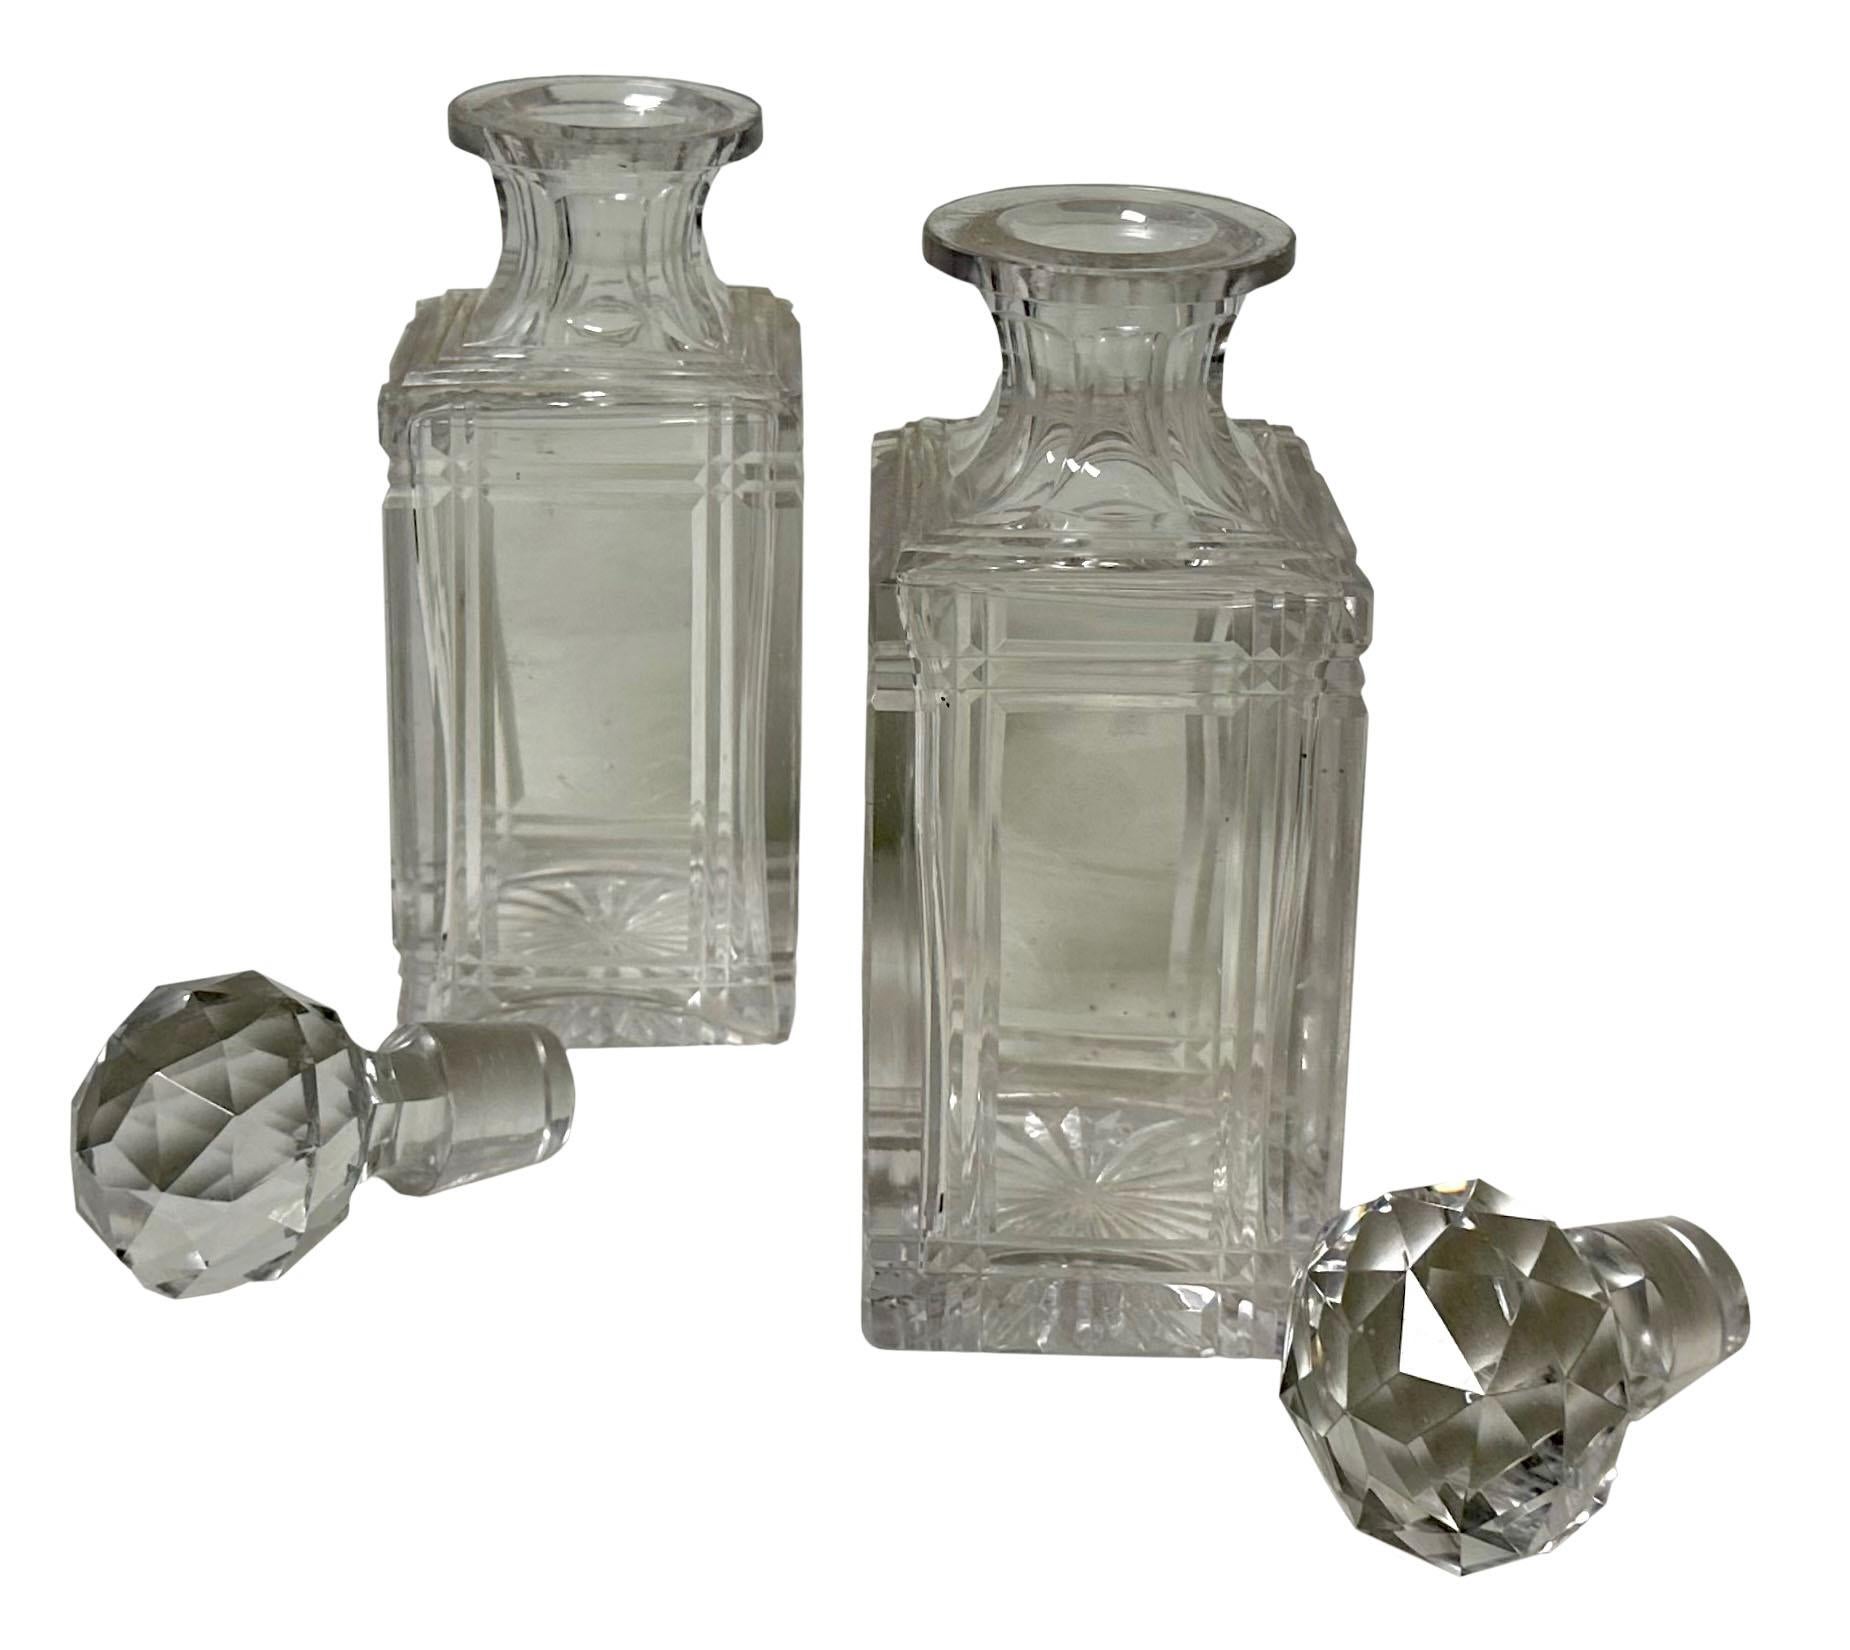 A pair of late 19th century English lead crystal perfume bottles beautifully cut and faceted. 
